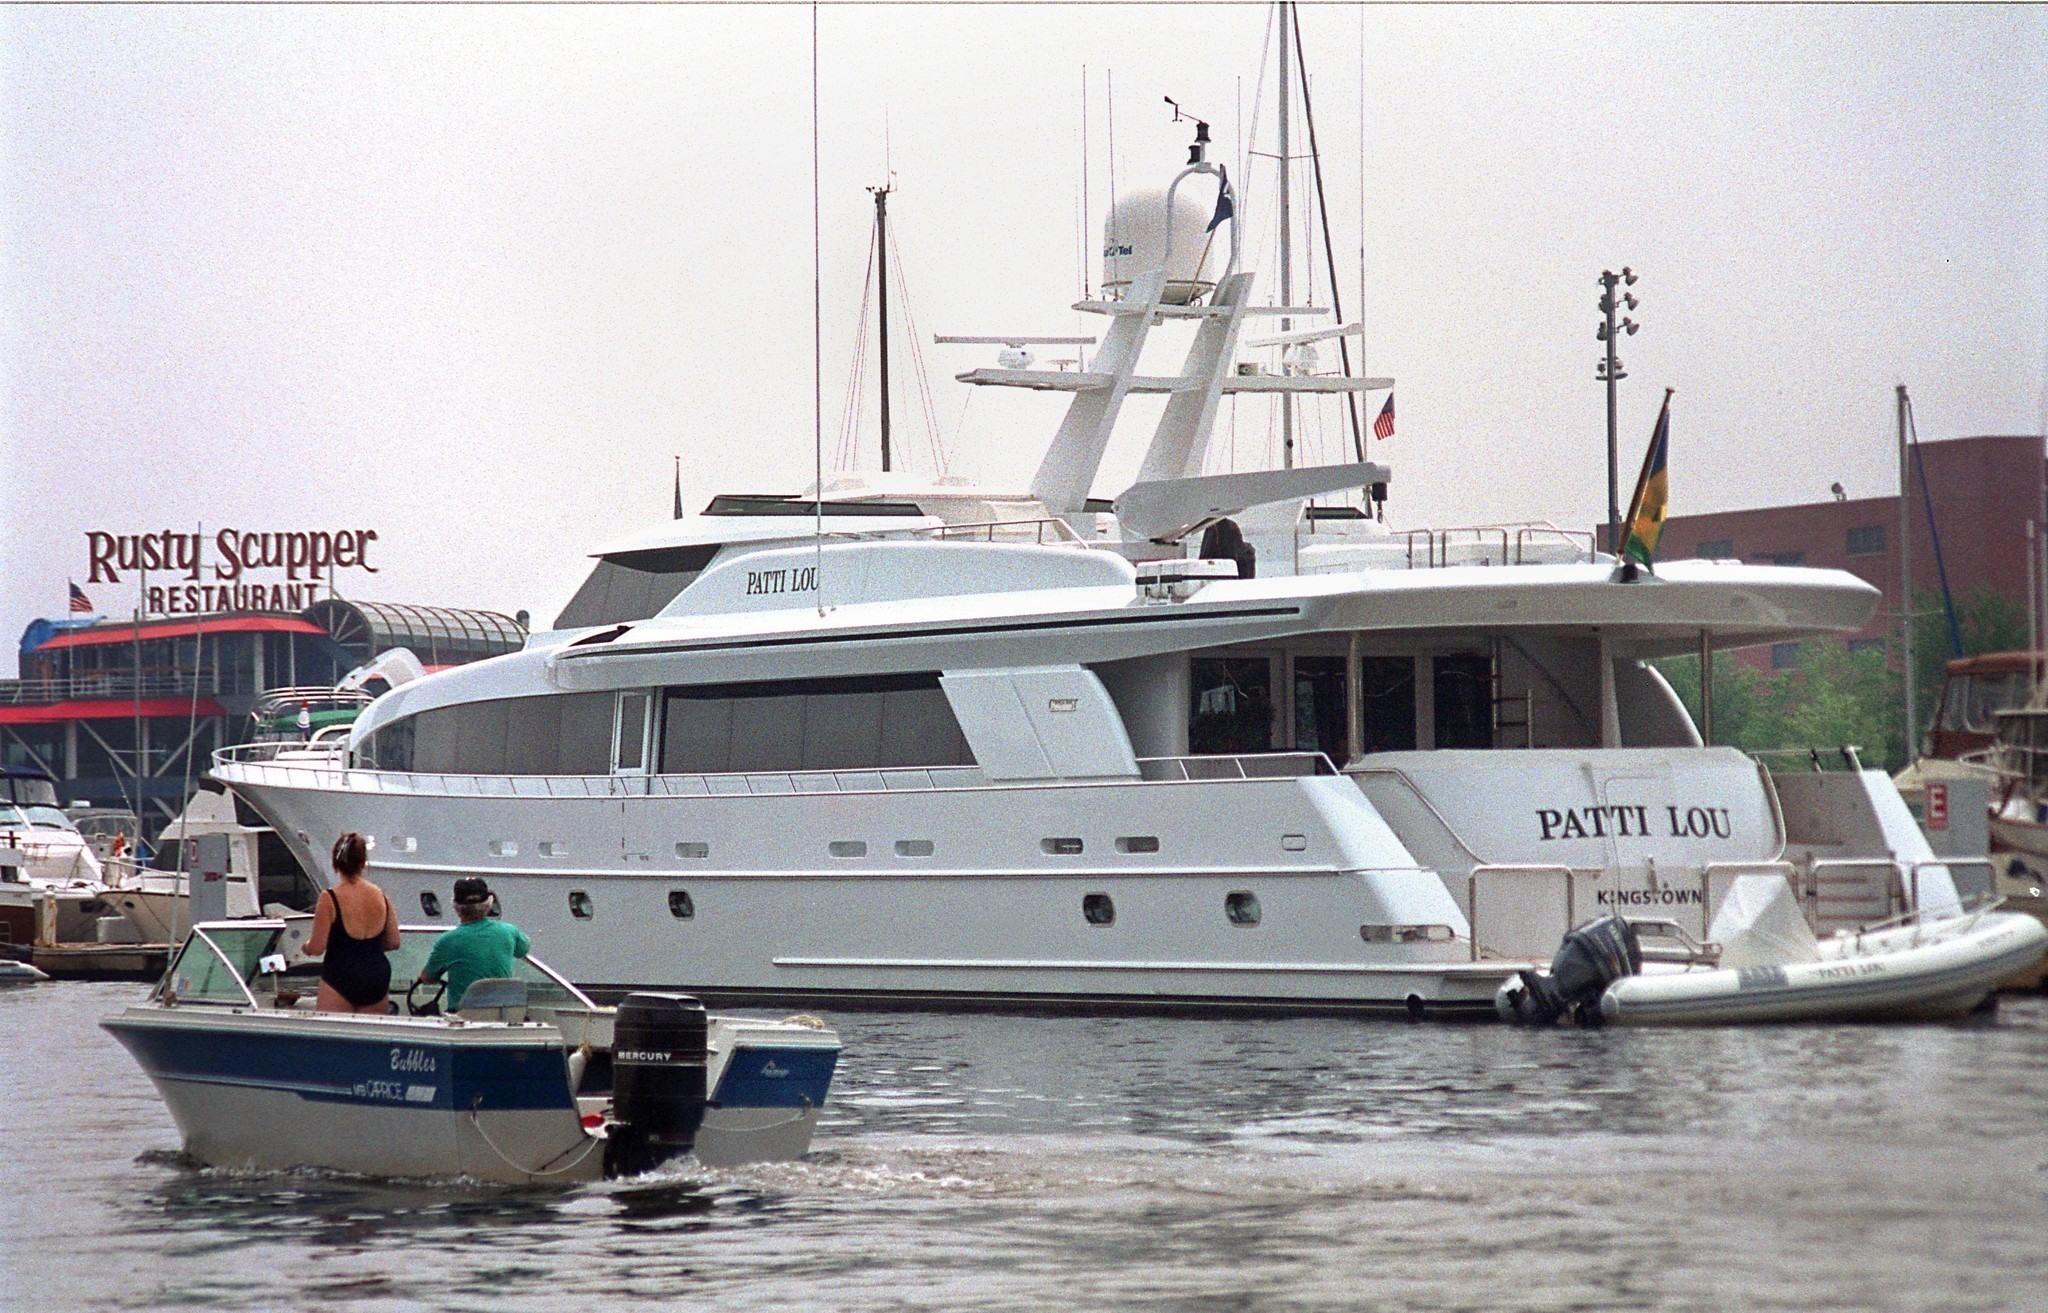 Most large yachts may now traverse Maryland waters without a bay pilot